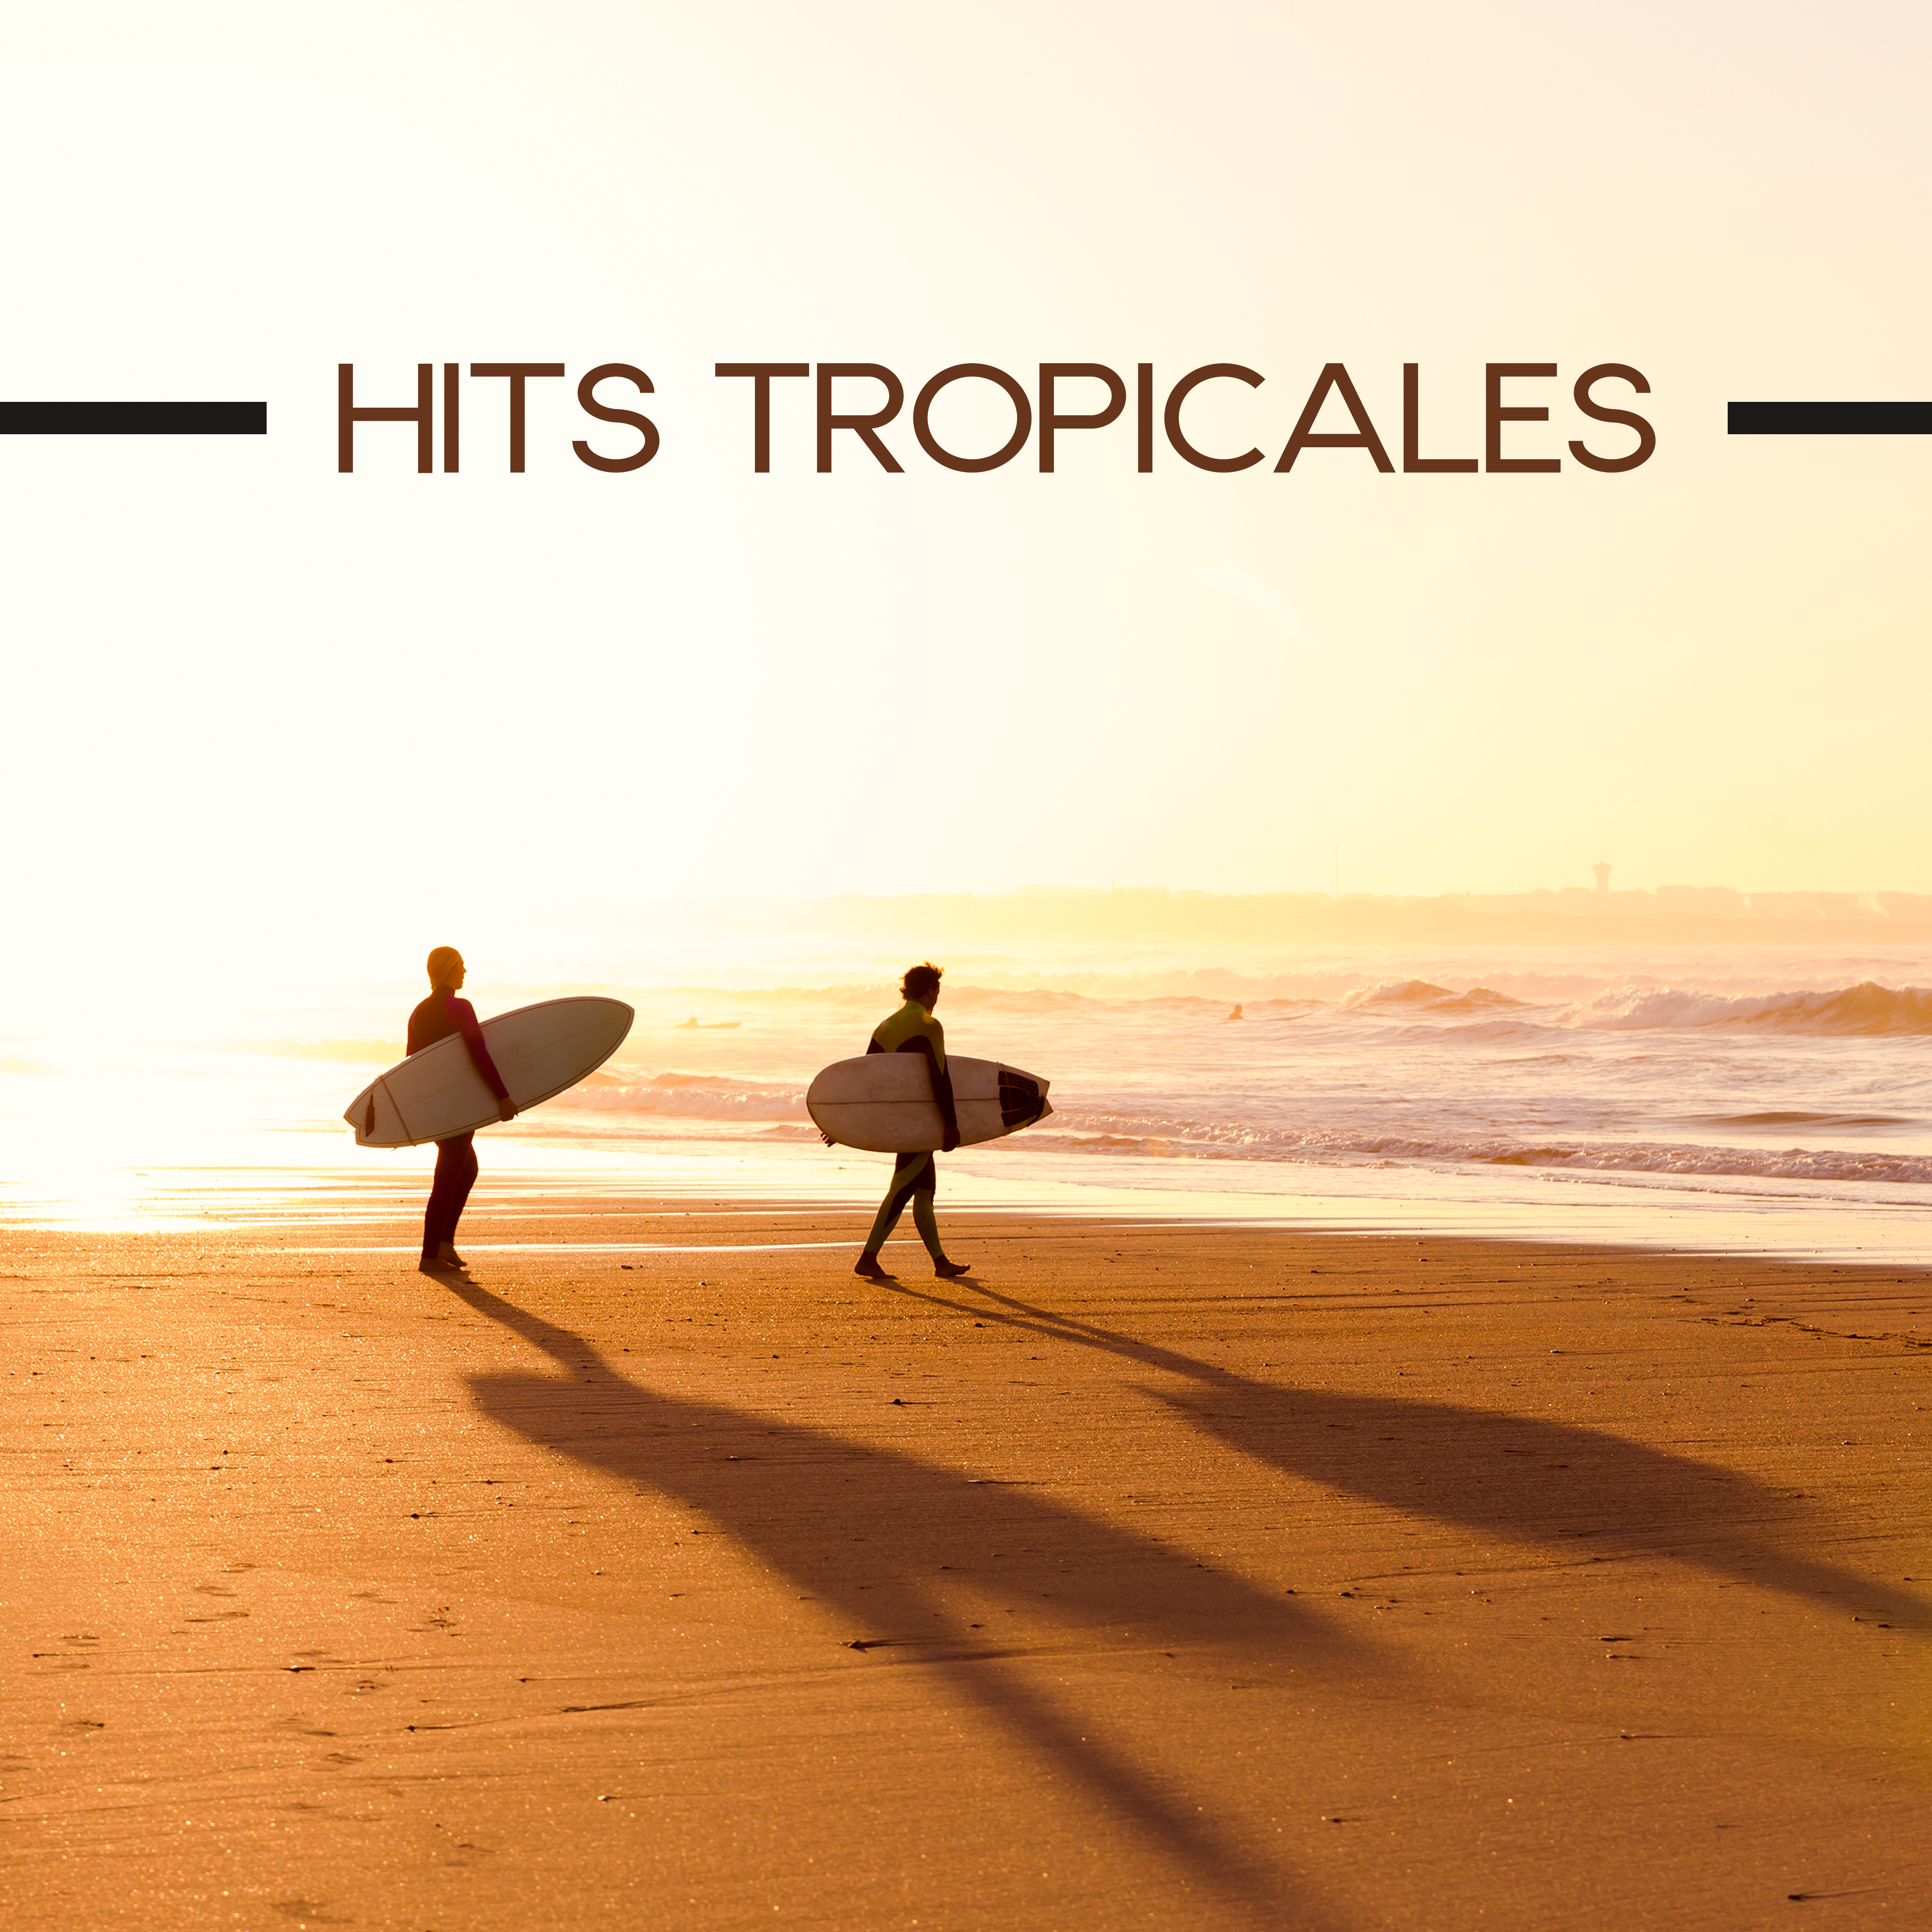 Hits Tropicales